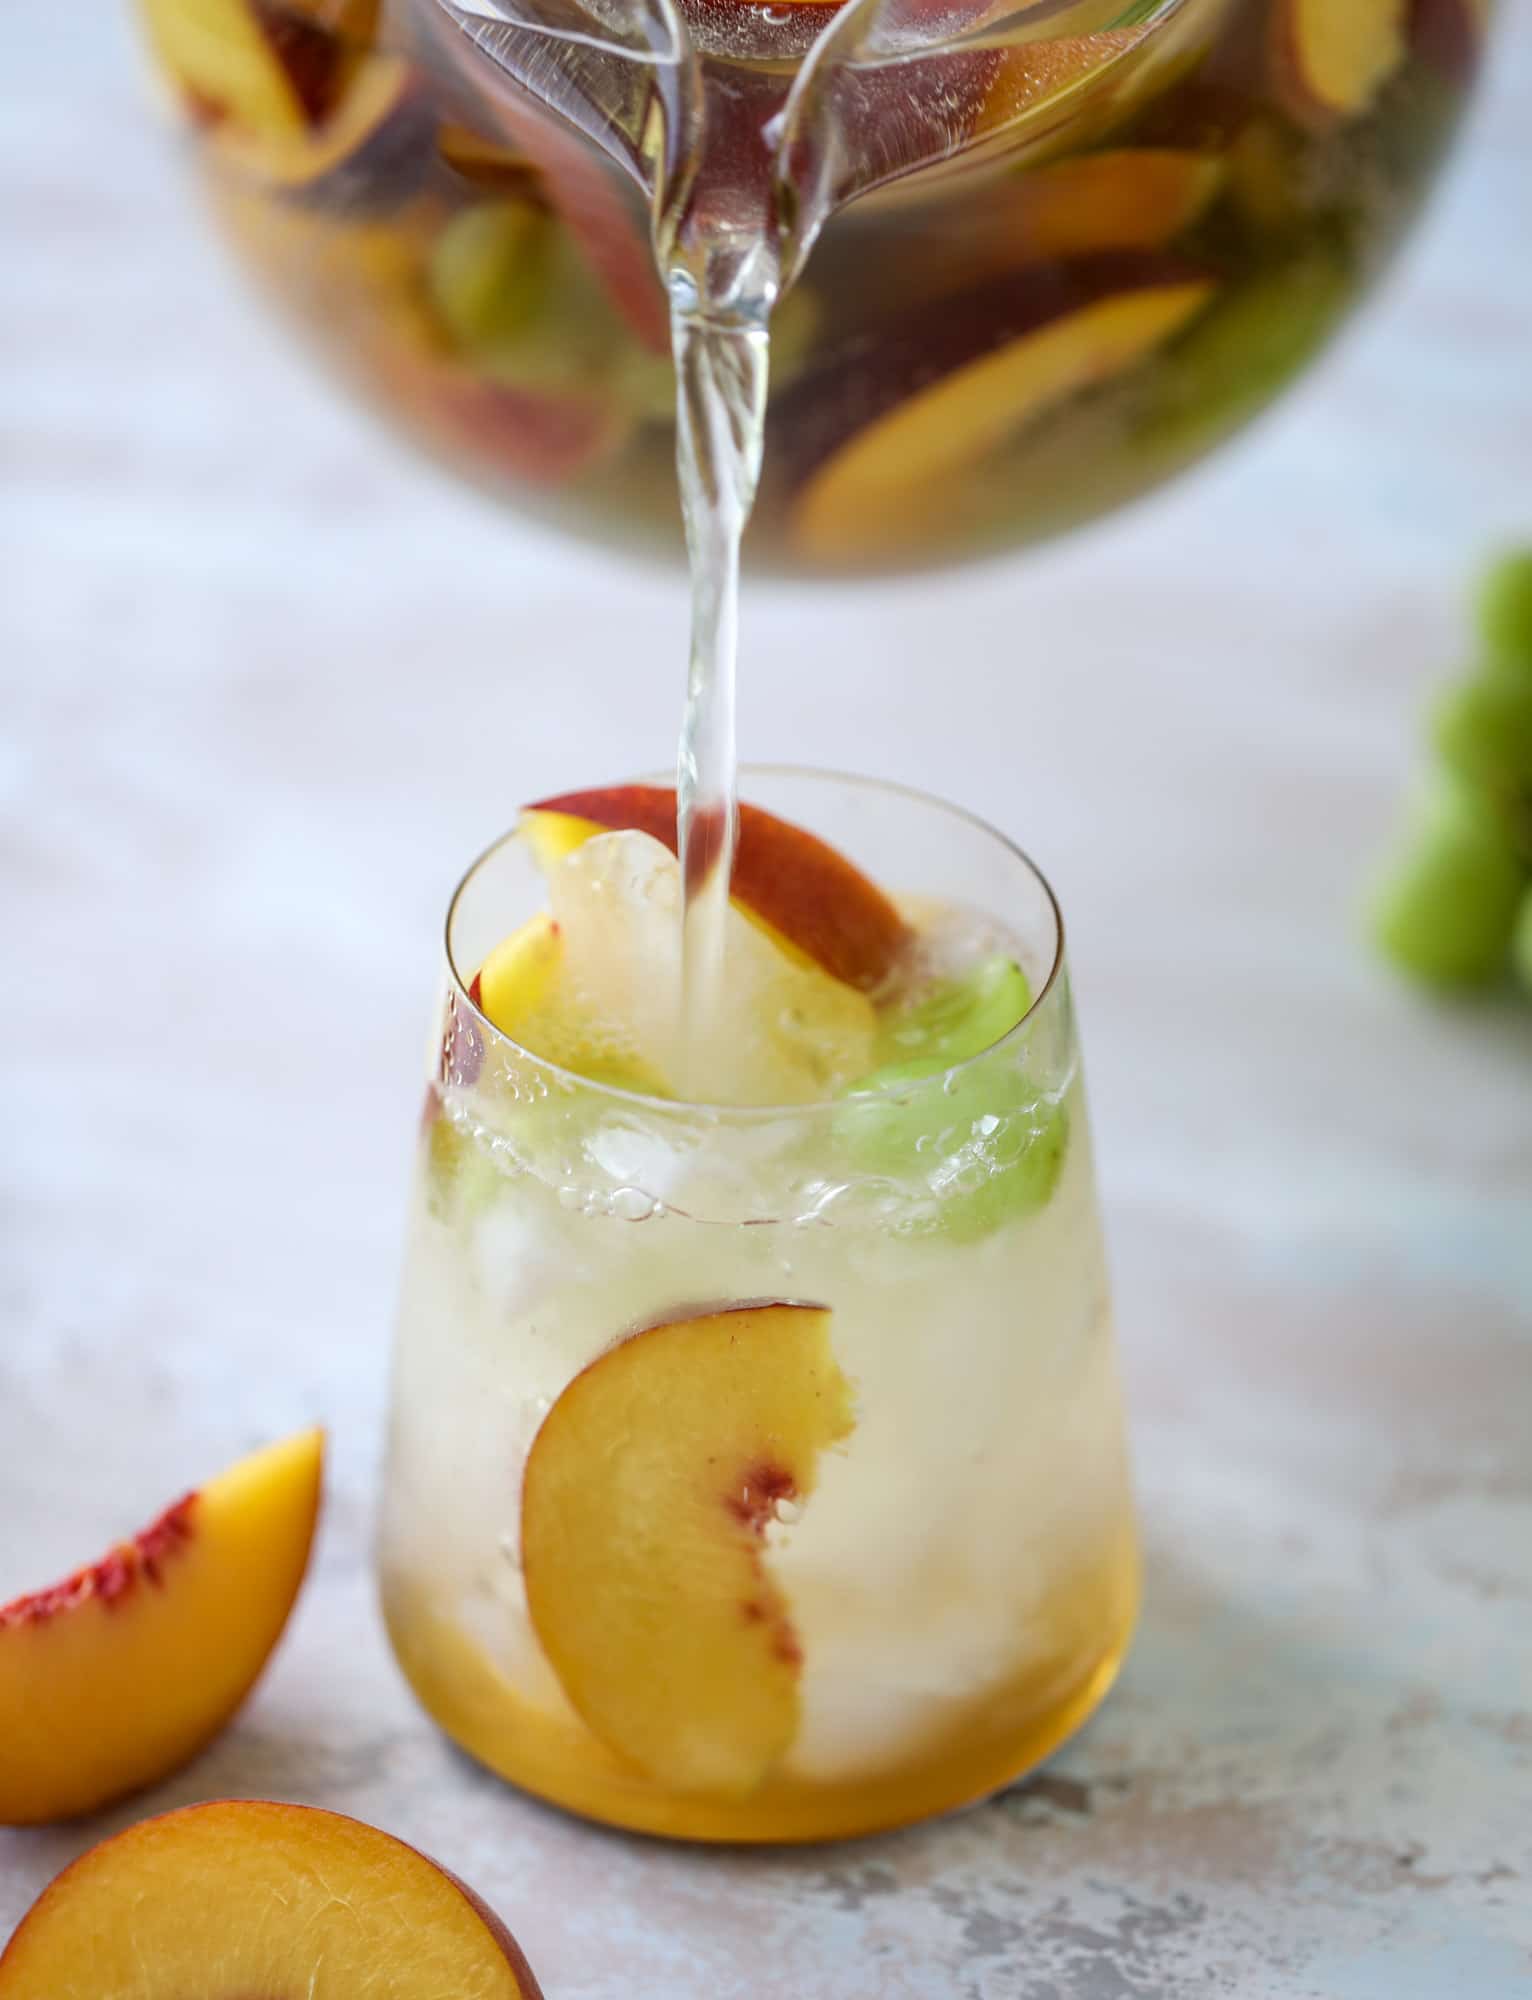 This pinot grigio sangria is absolutely perfect for summer, complete with peach nectar, fresh and frozen peach slices, brandy and bubbles! Frozen green grapes add some chill without watering down the drink. It's perfect! I howsweeteats.com #pinot #grigio #peach #sangria #cocktails #punch #summer #wine